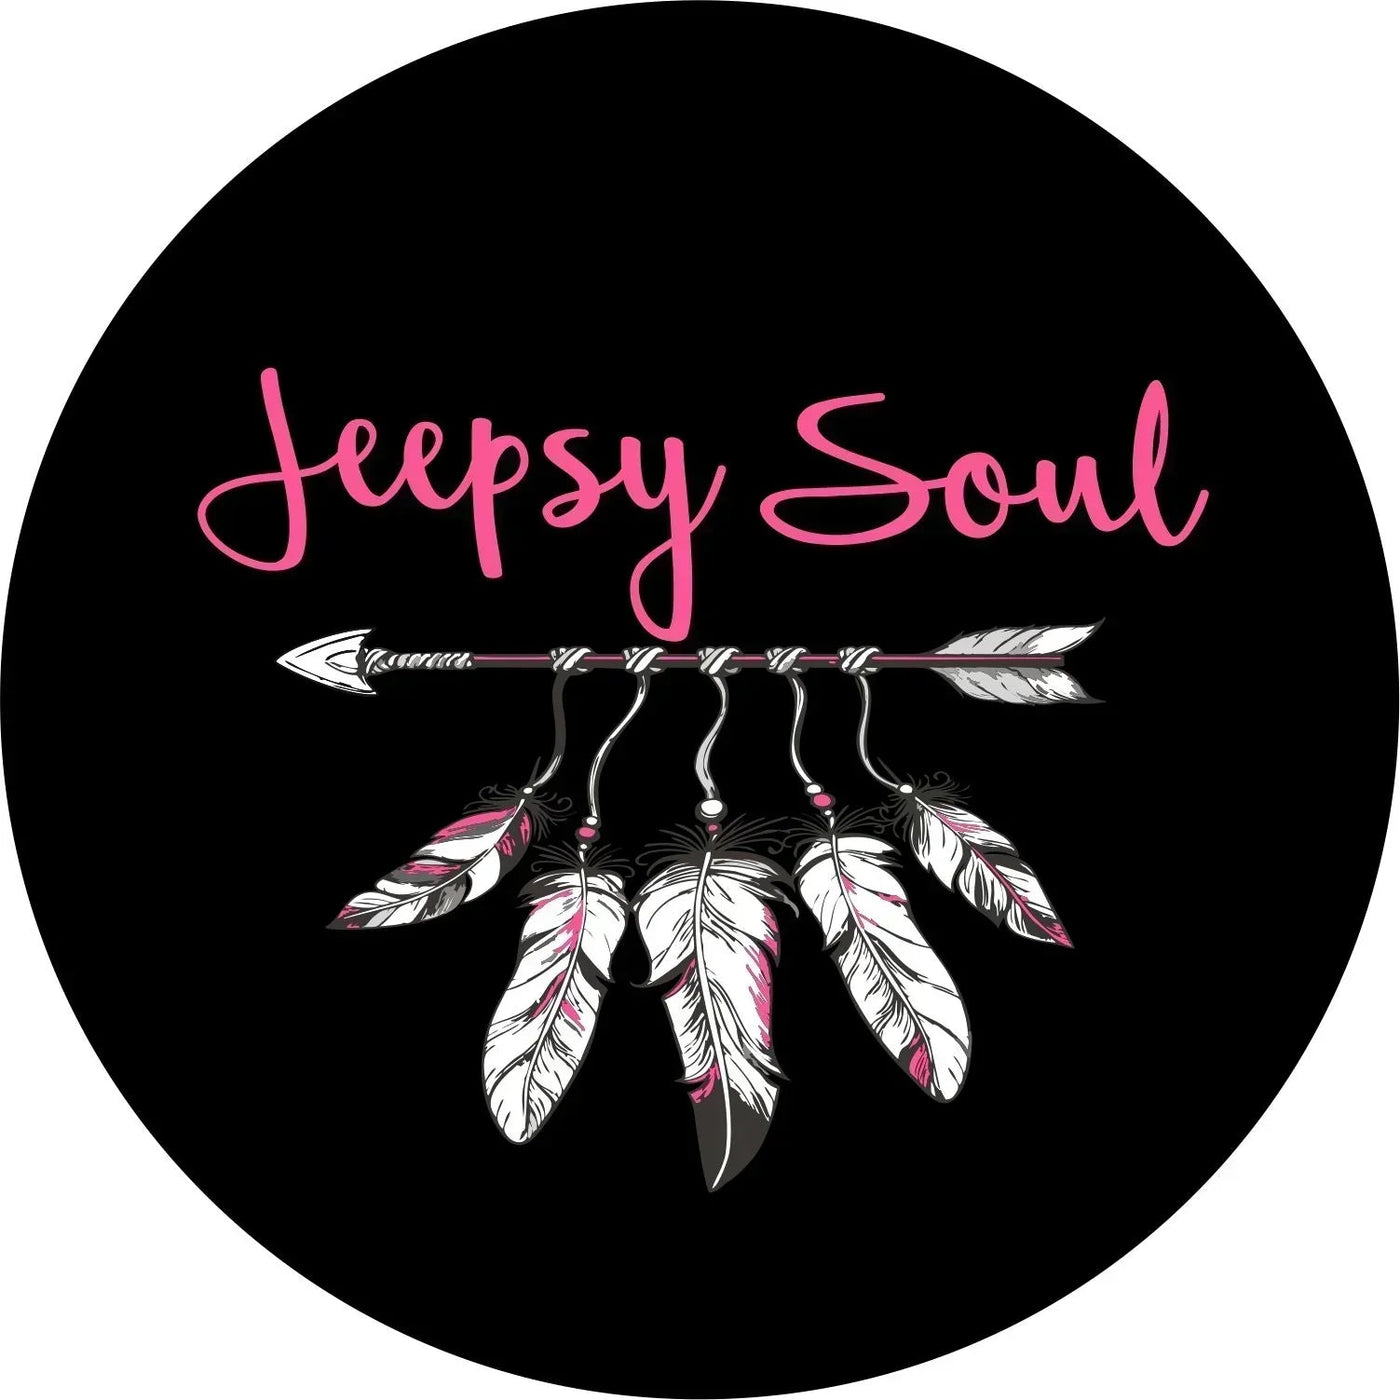 Jeepsy Soul Custom Color Spare Tire Cover - Goats Trail